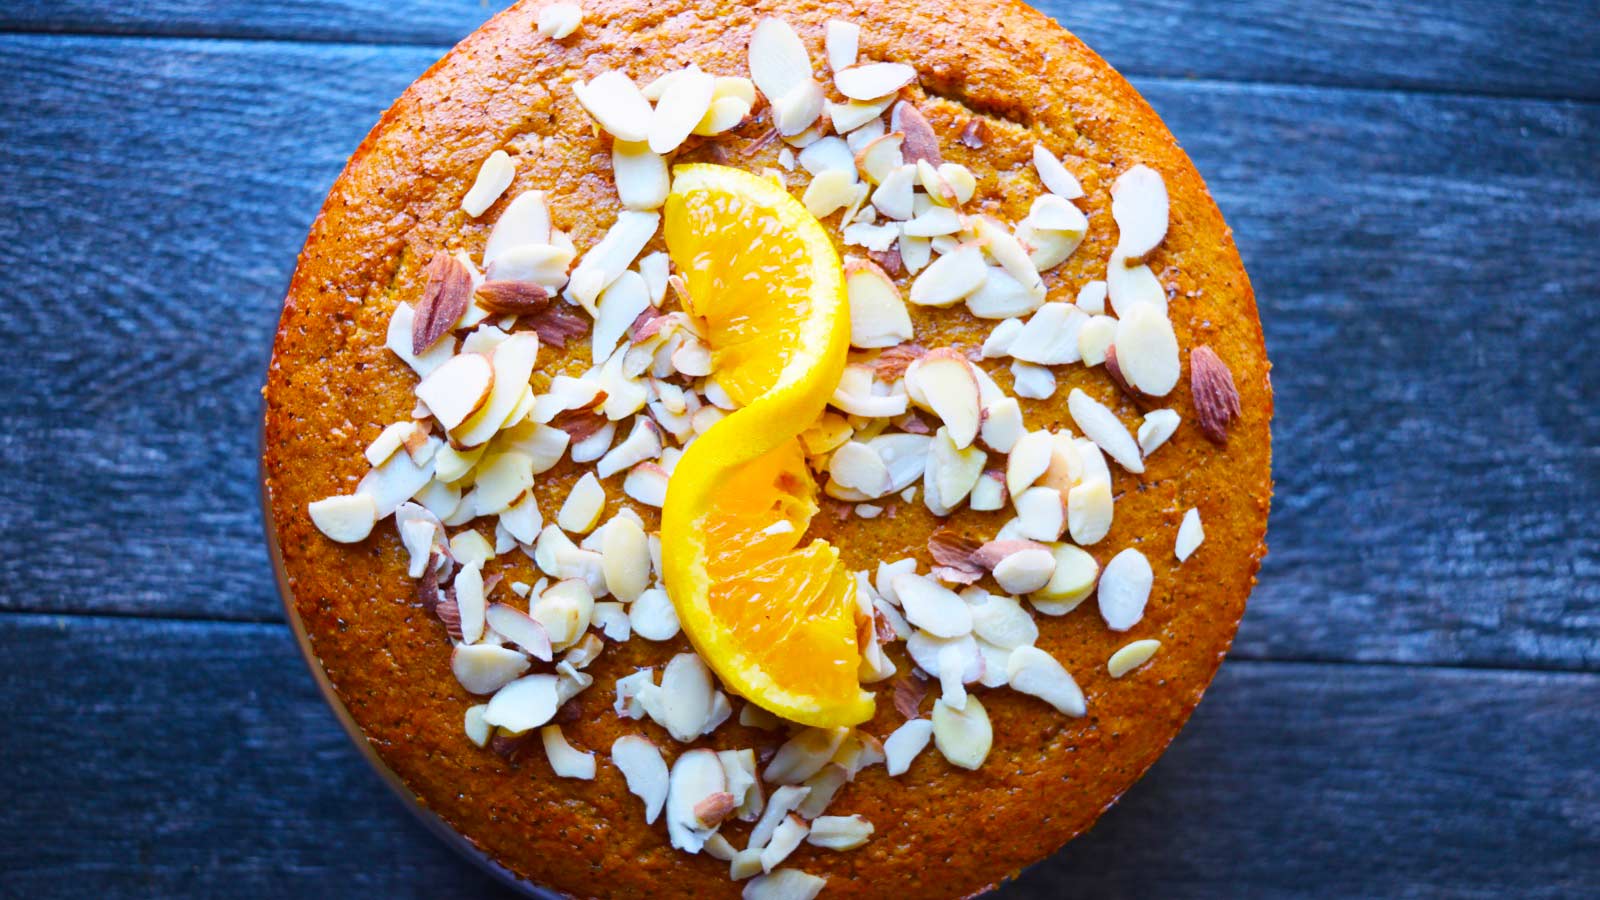 Sliced almonds and an orange twist added as garnish to the top of the cake.